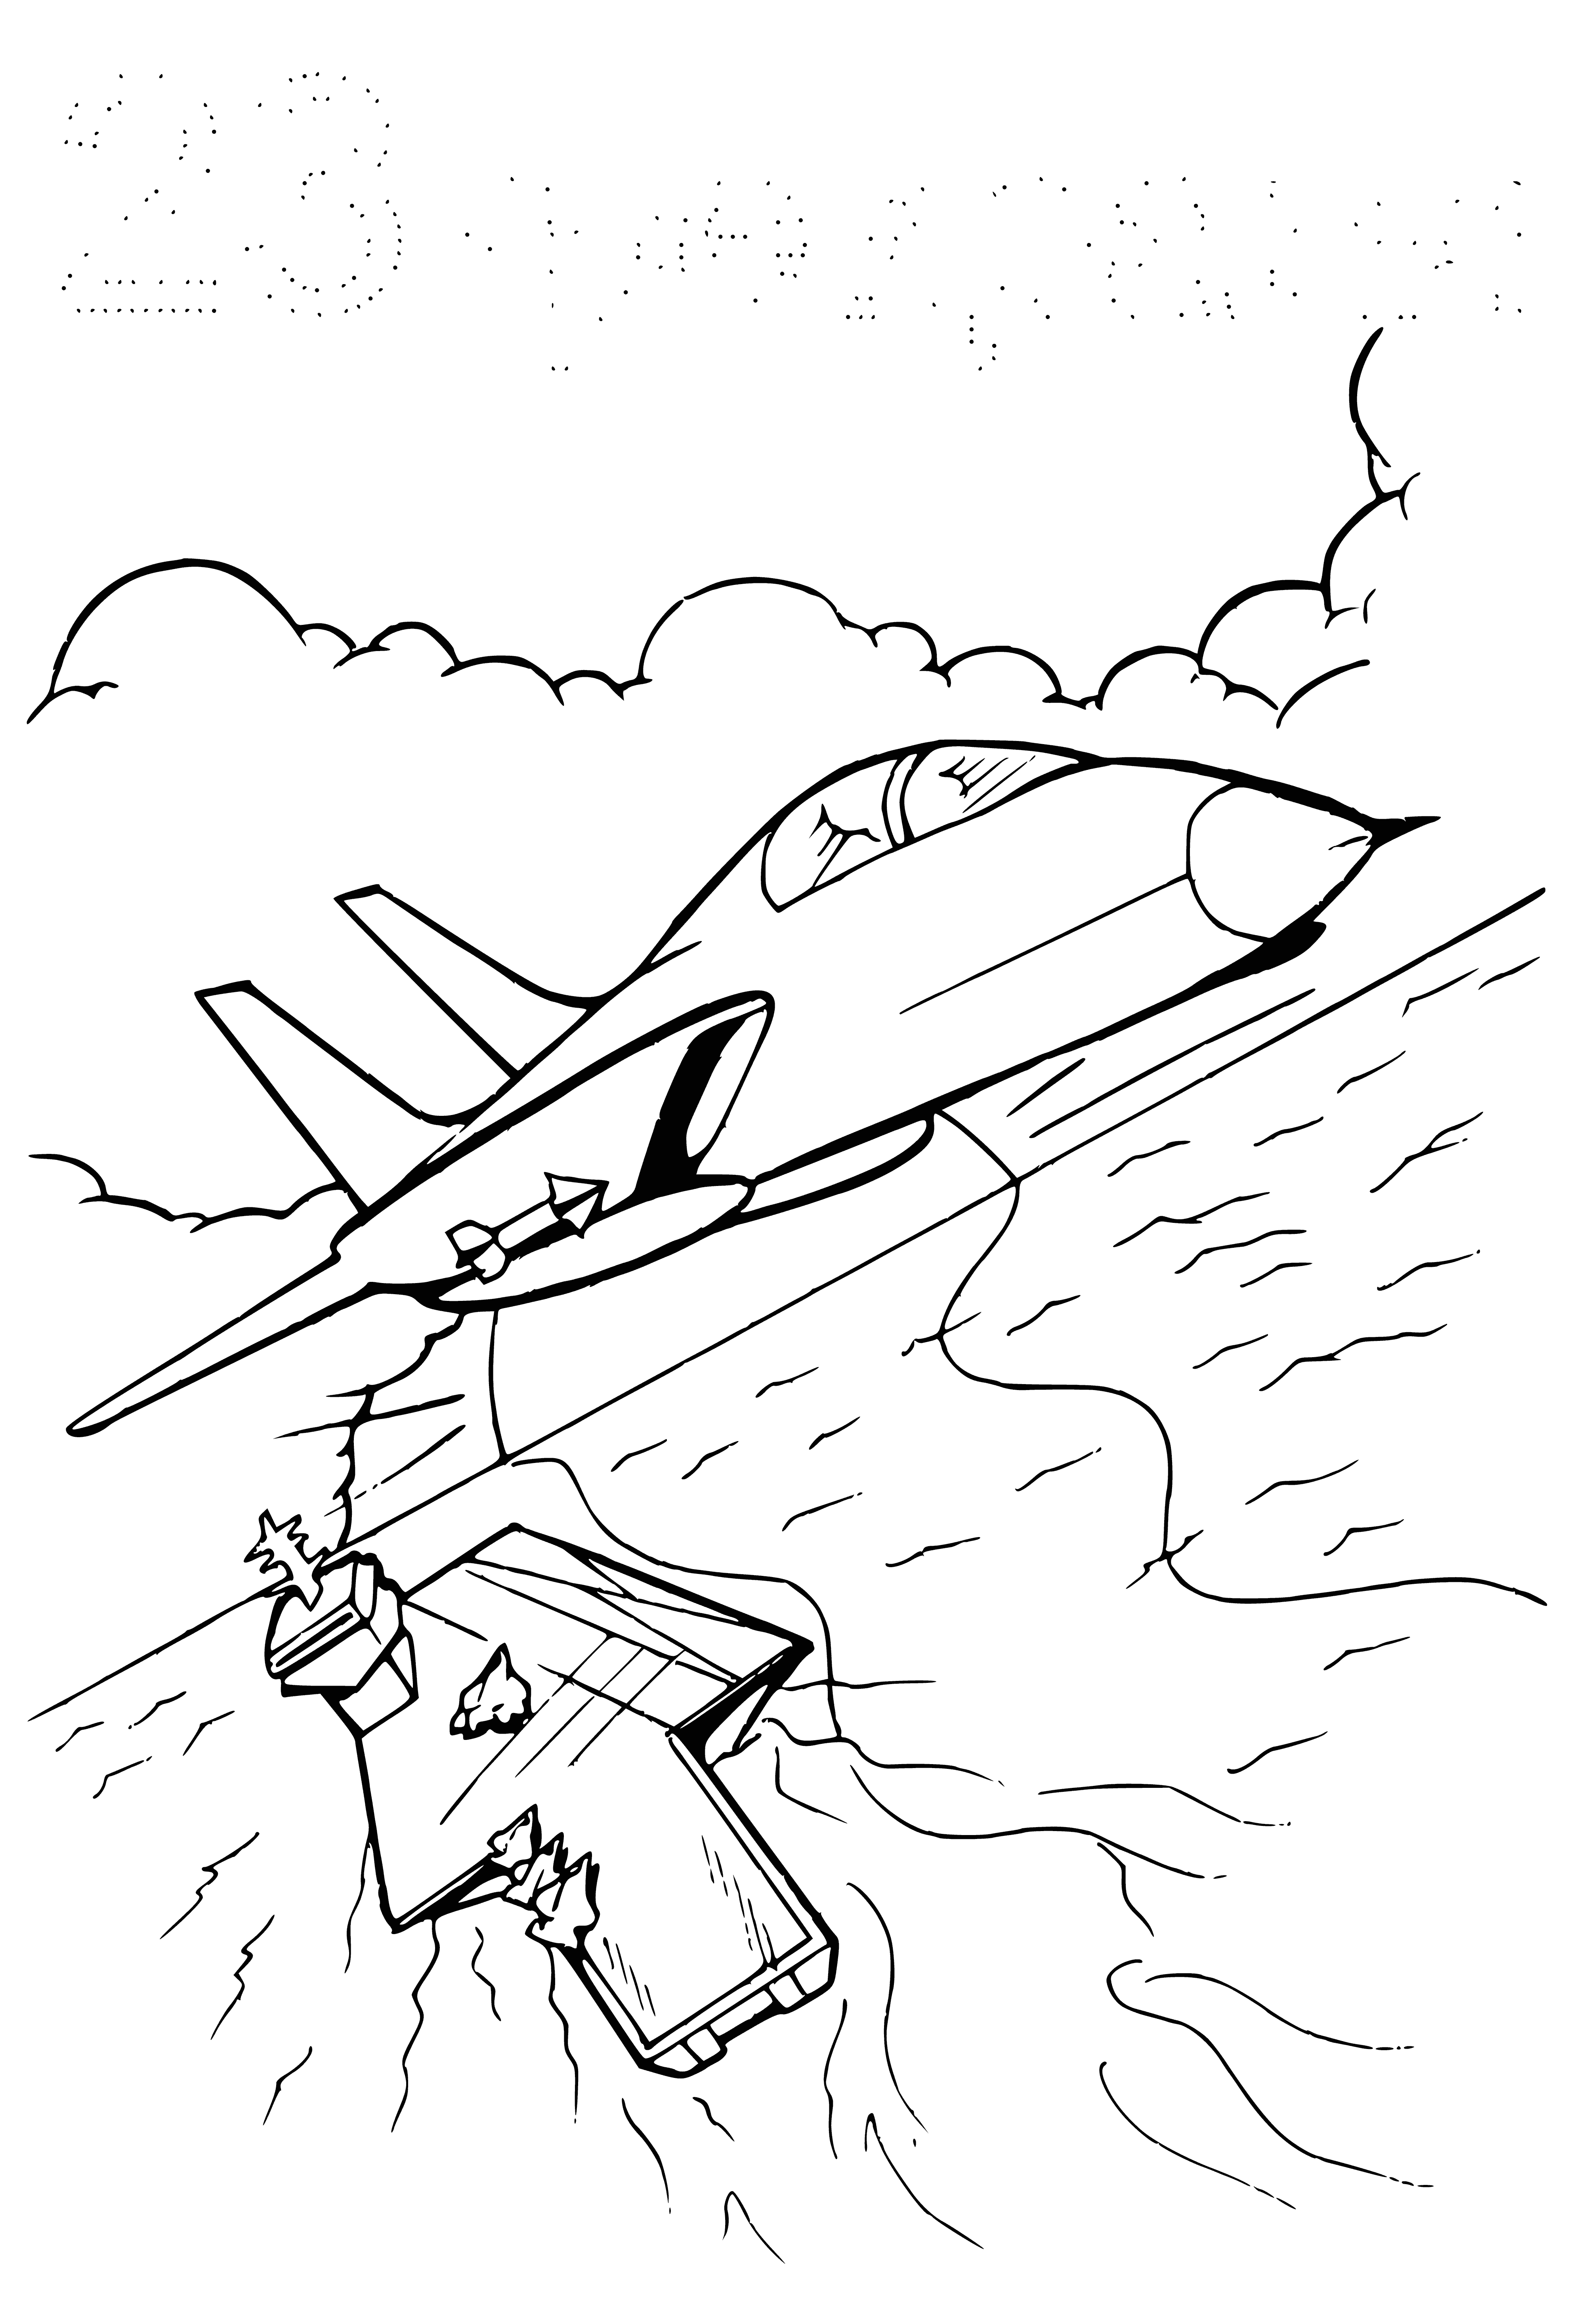 Defender of the Fatherland Day coloring page